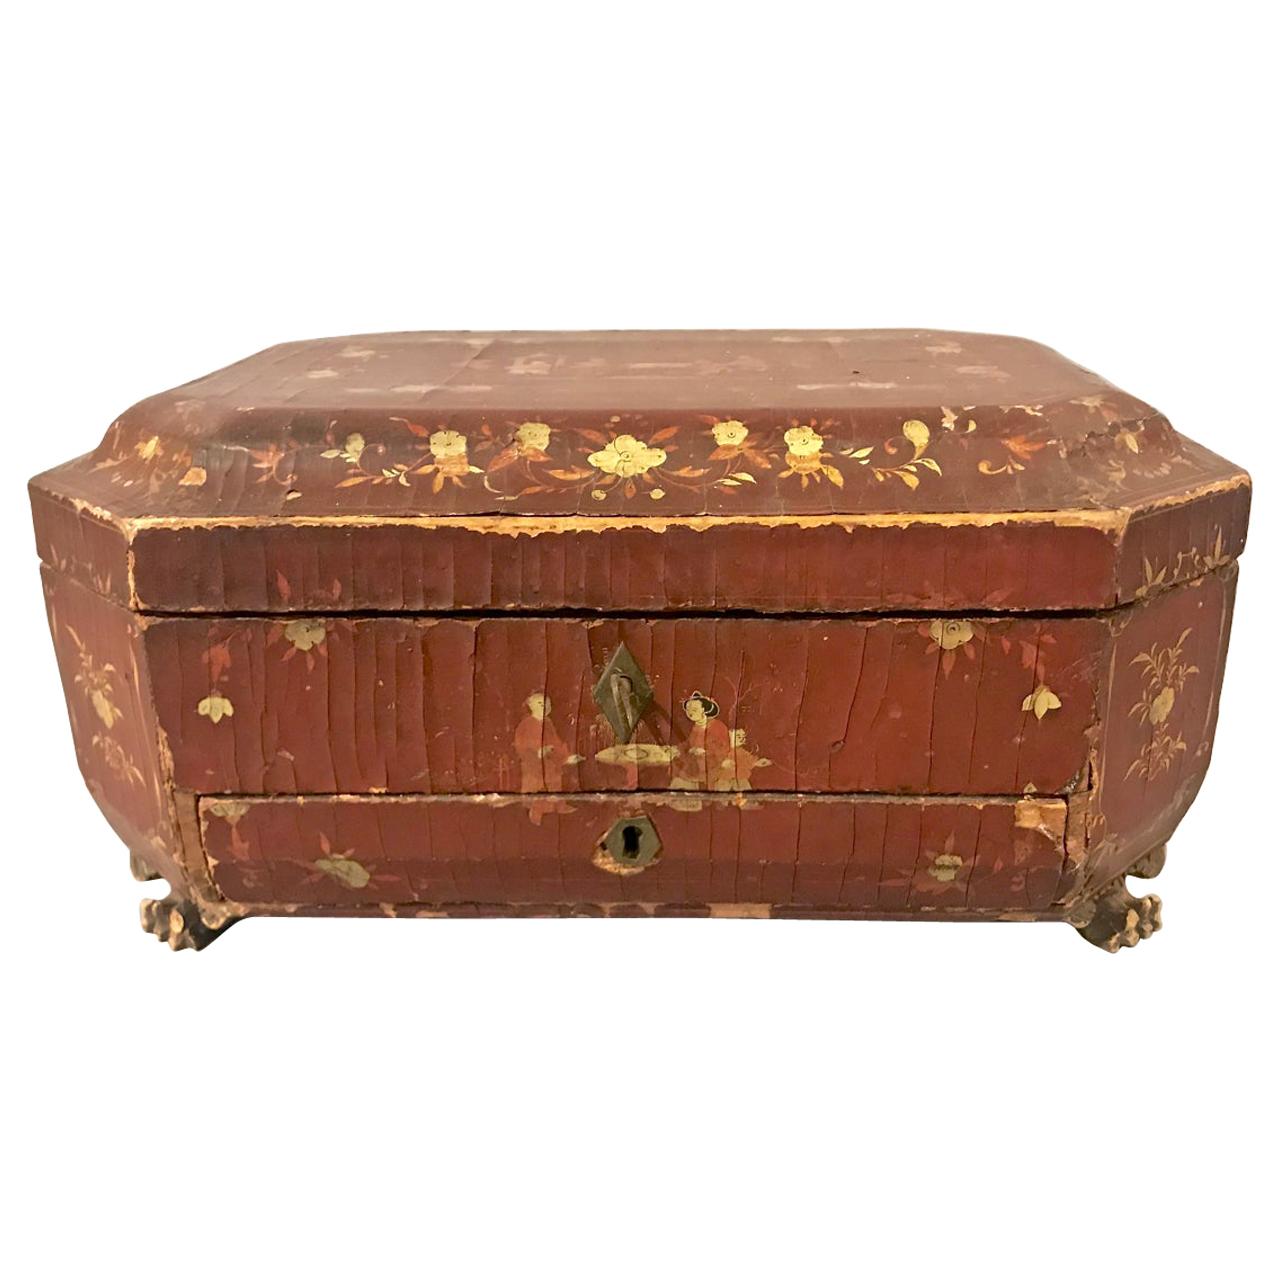 Early 19th Century Chinese Lacquer Box